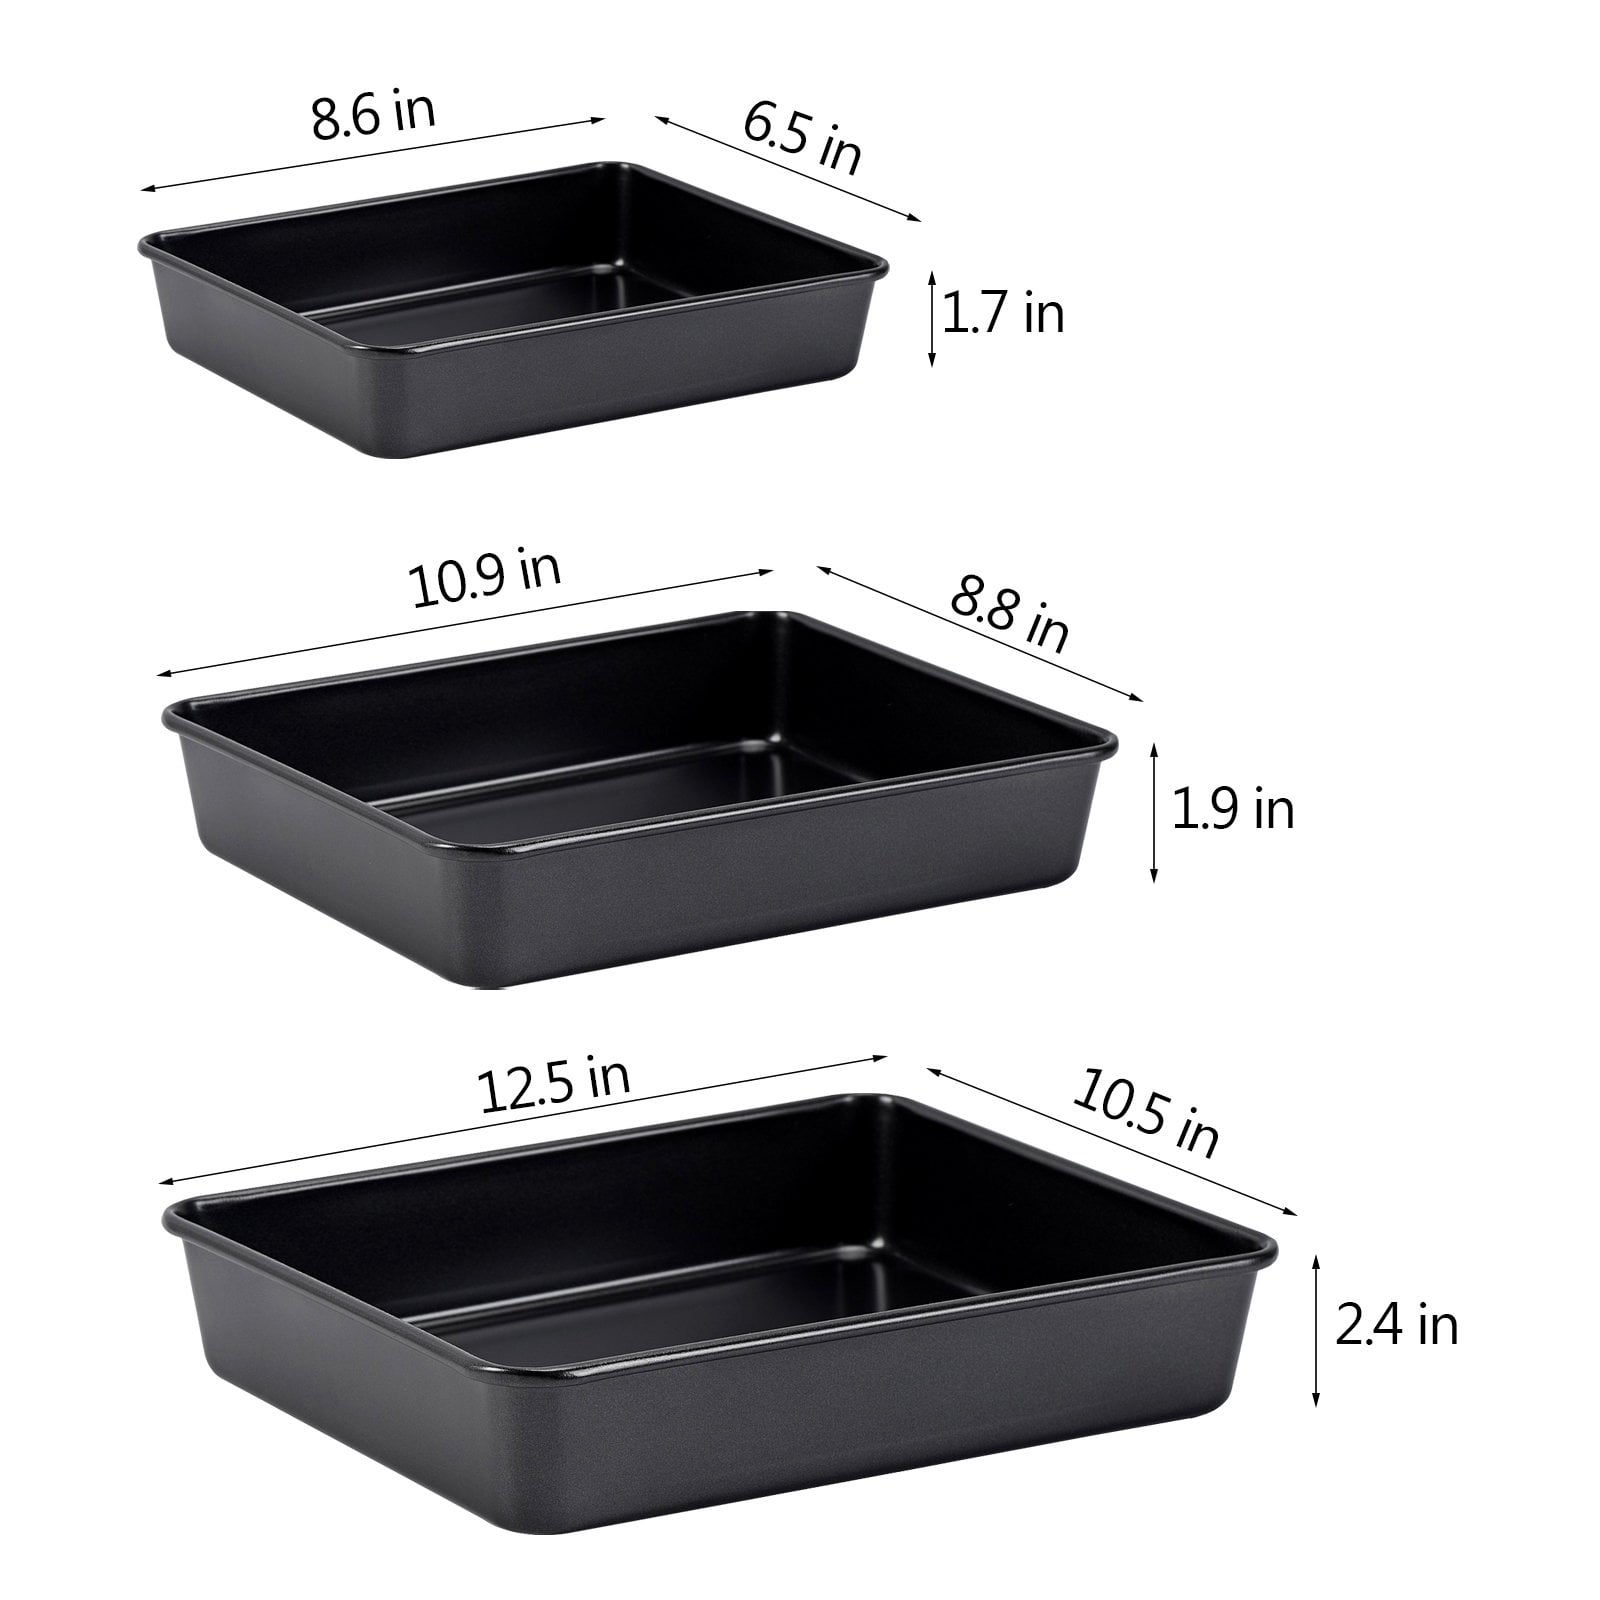 Extra large 43x30cm Non-Stick Shallow Roasting Pan/Oven Baking Tray  w/Hanndle